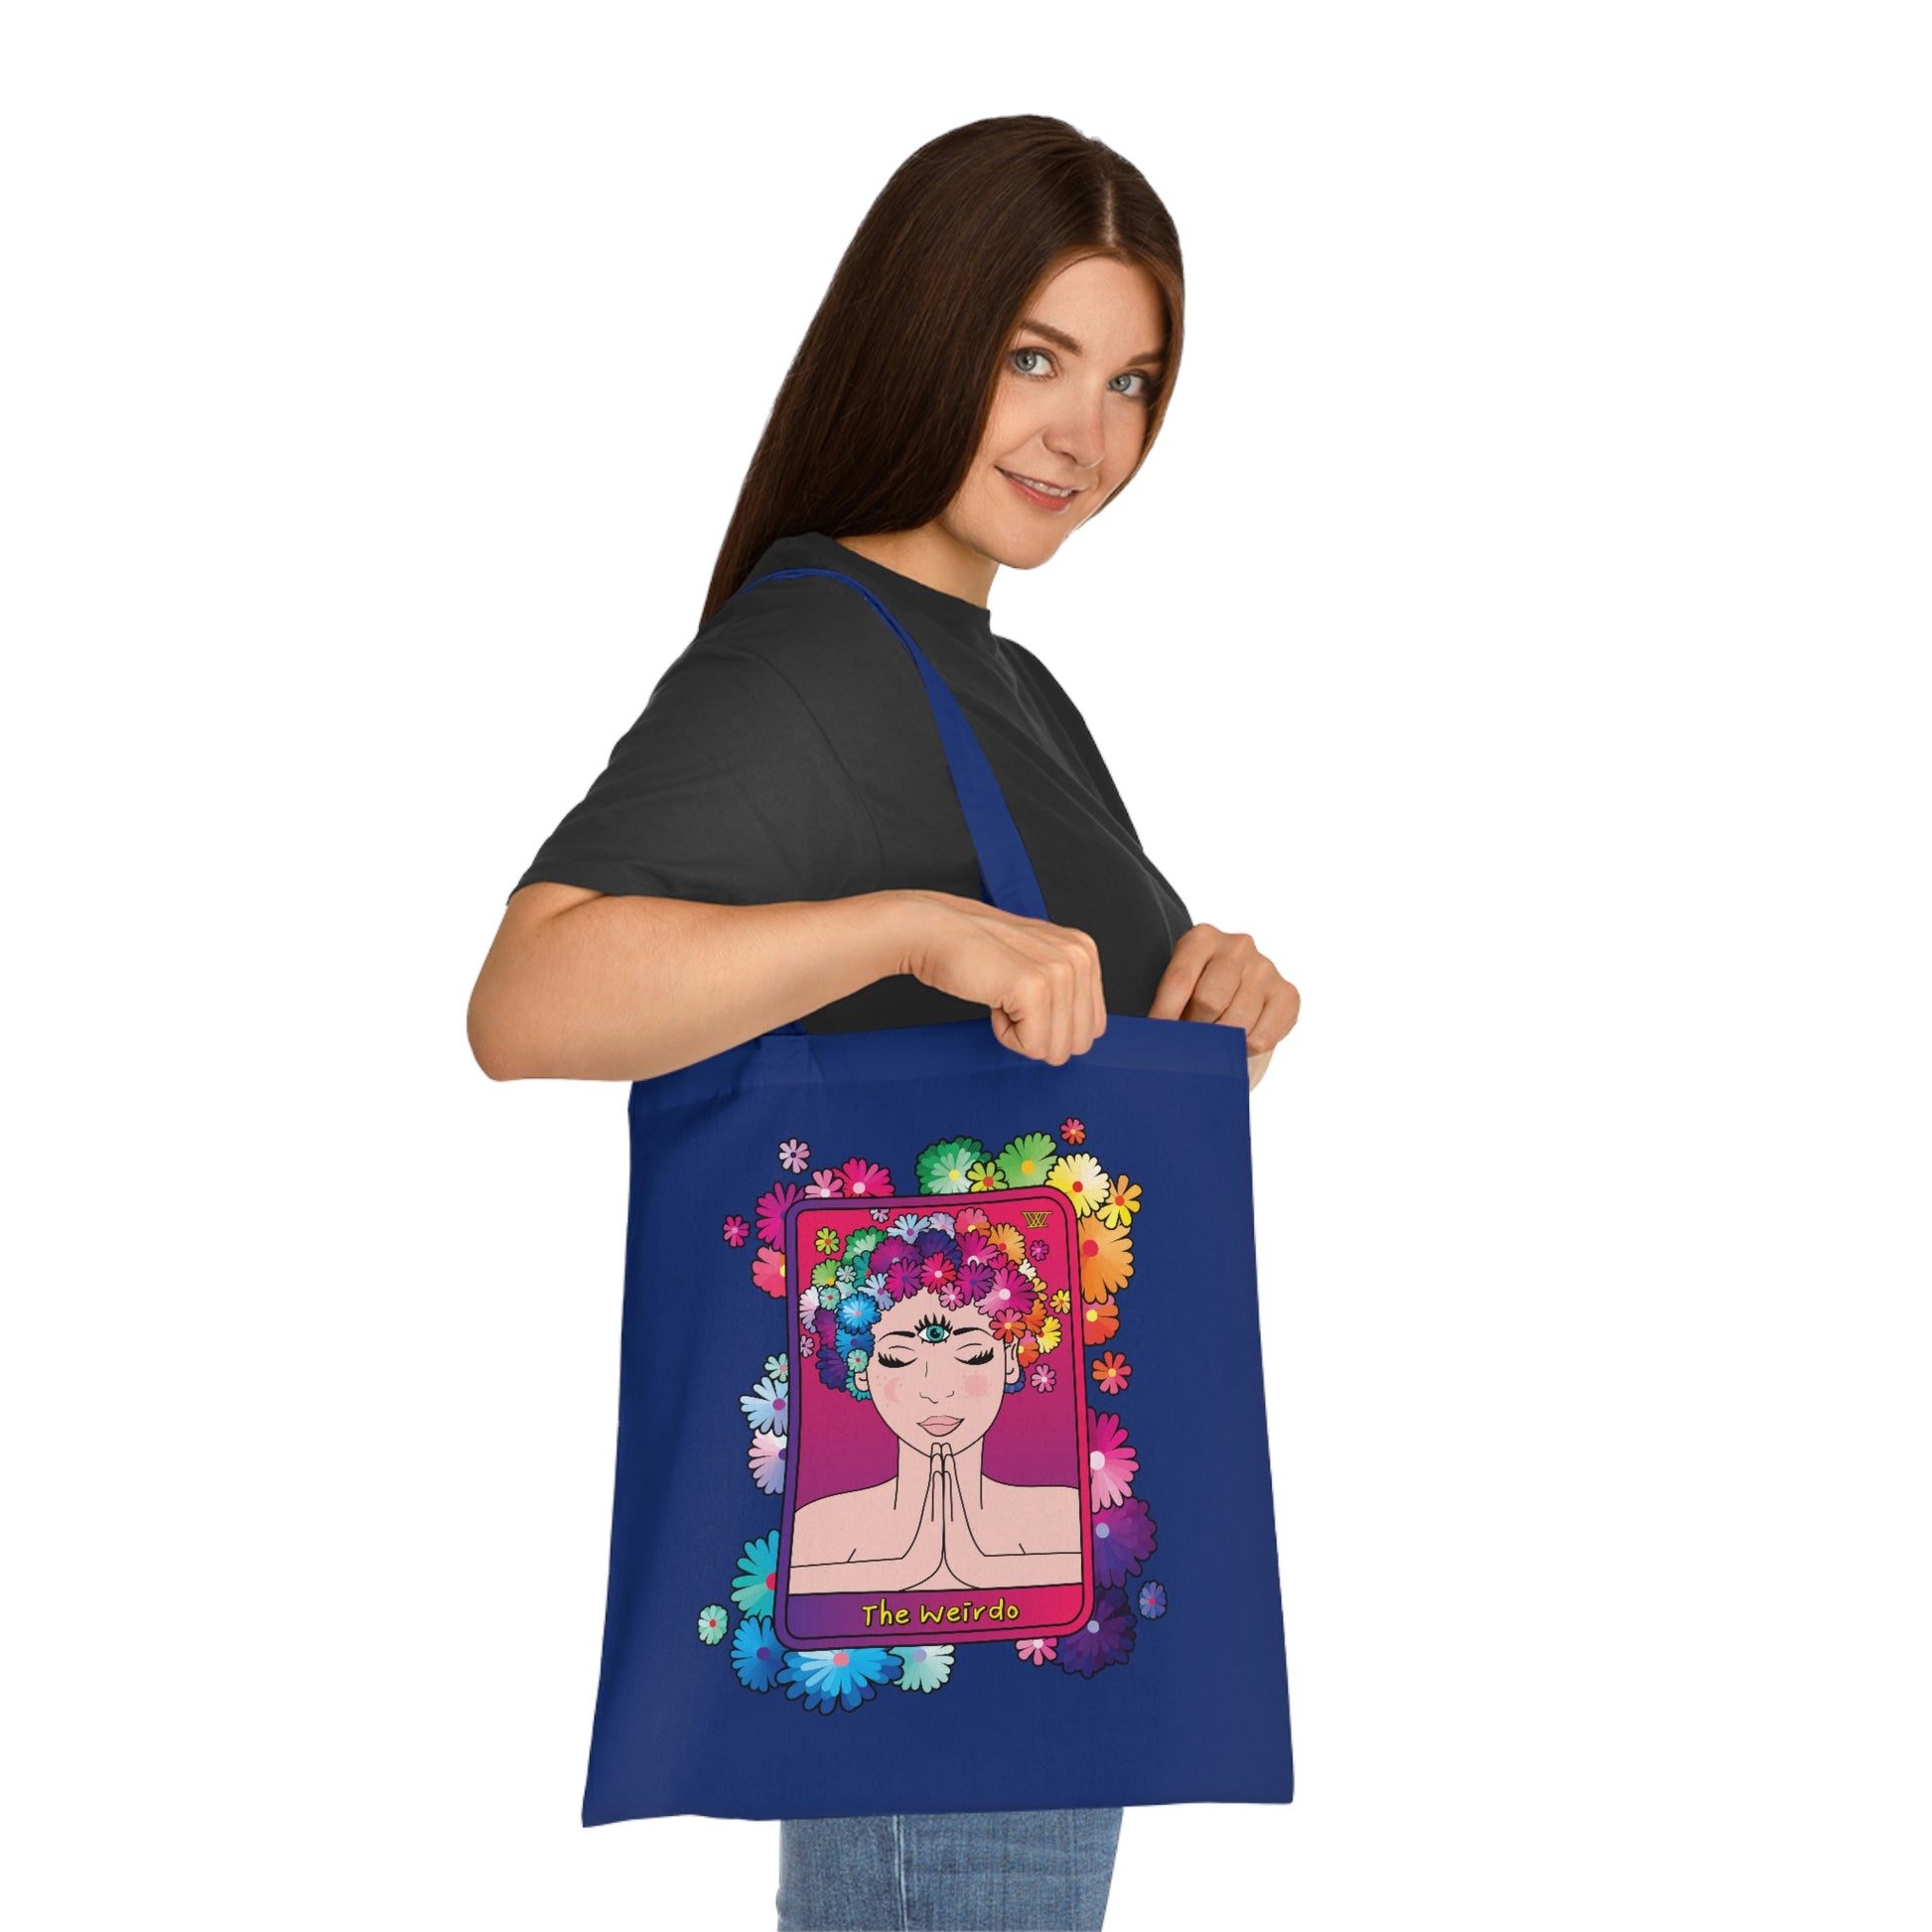 Weirdo | Tote bag for spiritual people! This blue tote bag is 100% cotton and has the Weirdo tarot card displayed at the front of the bag.